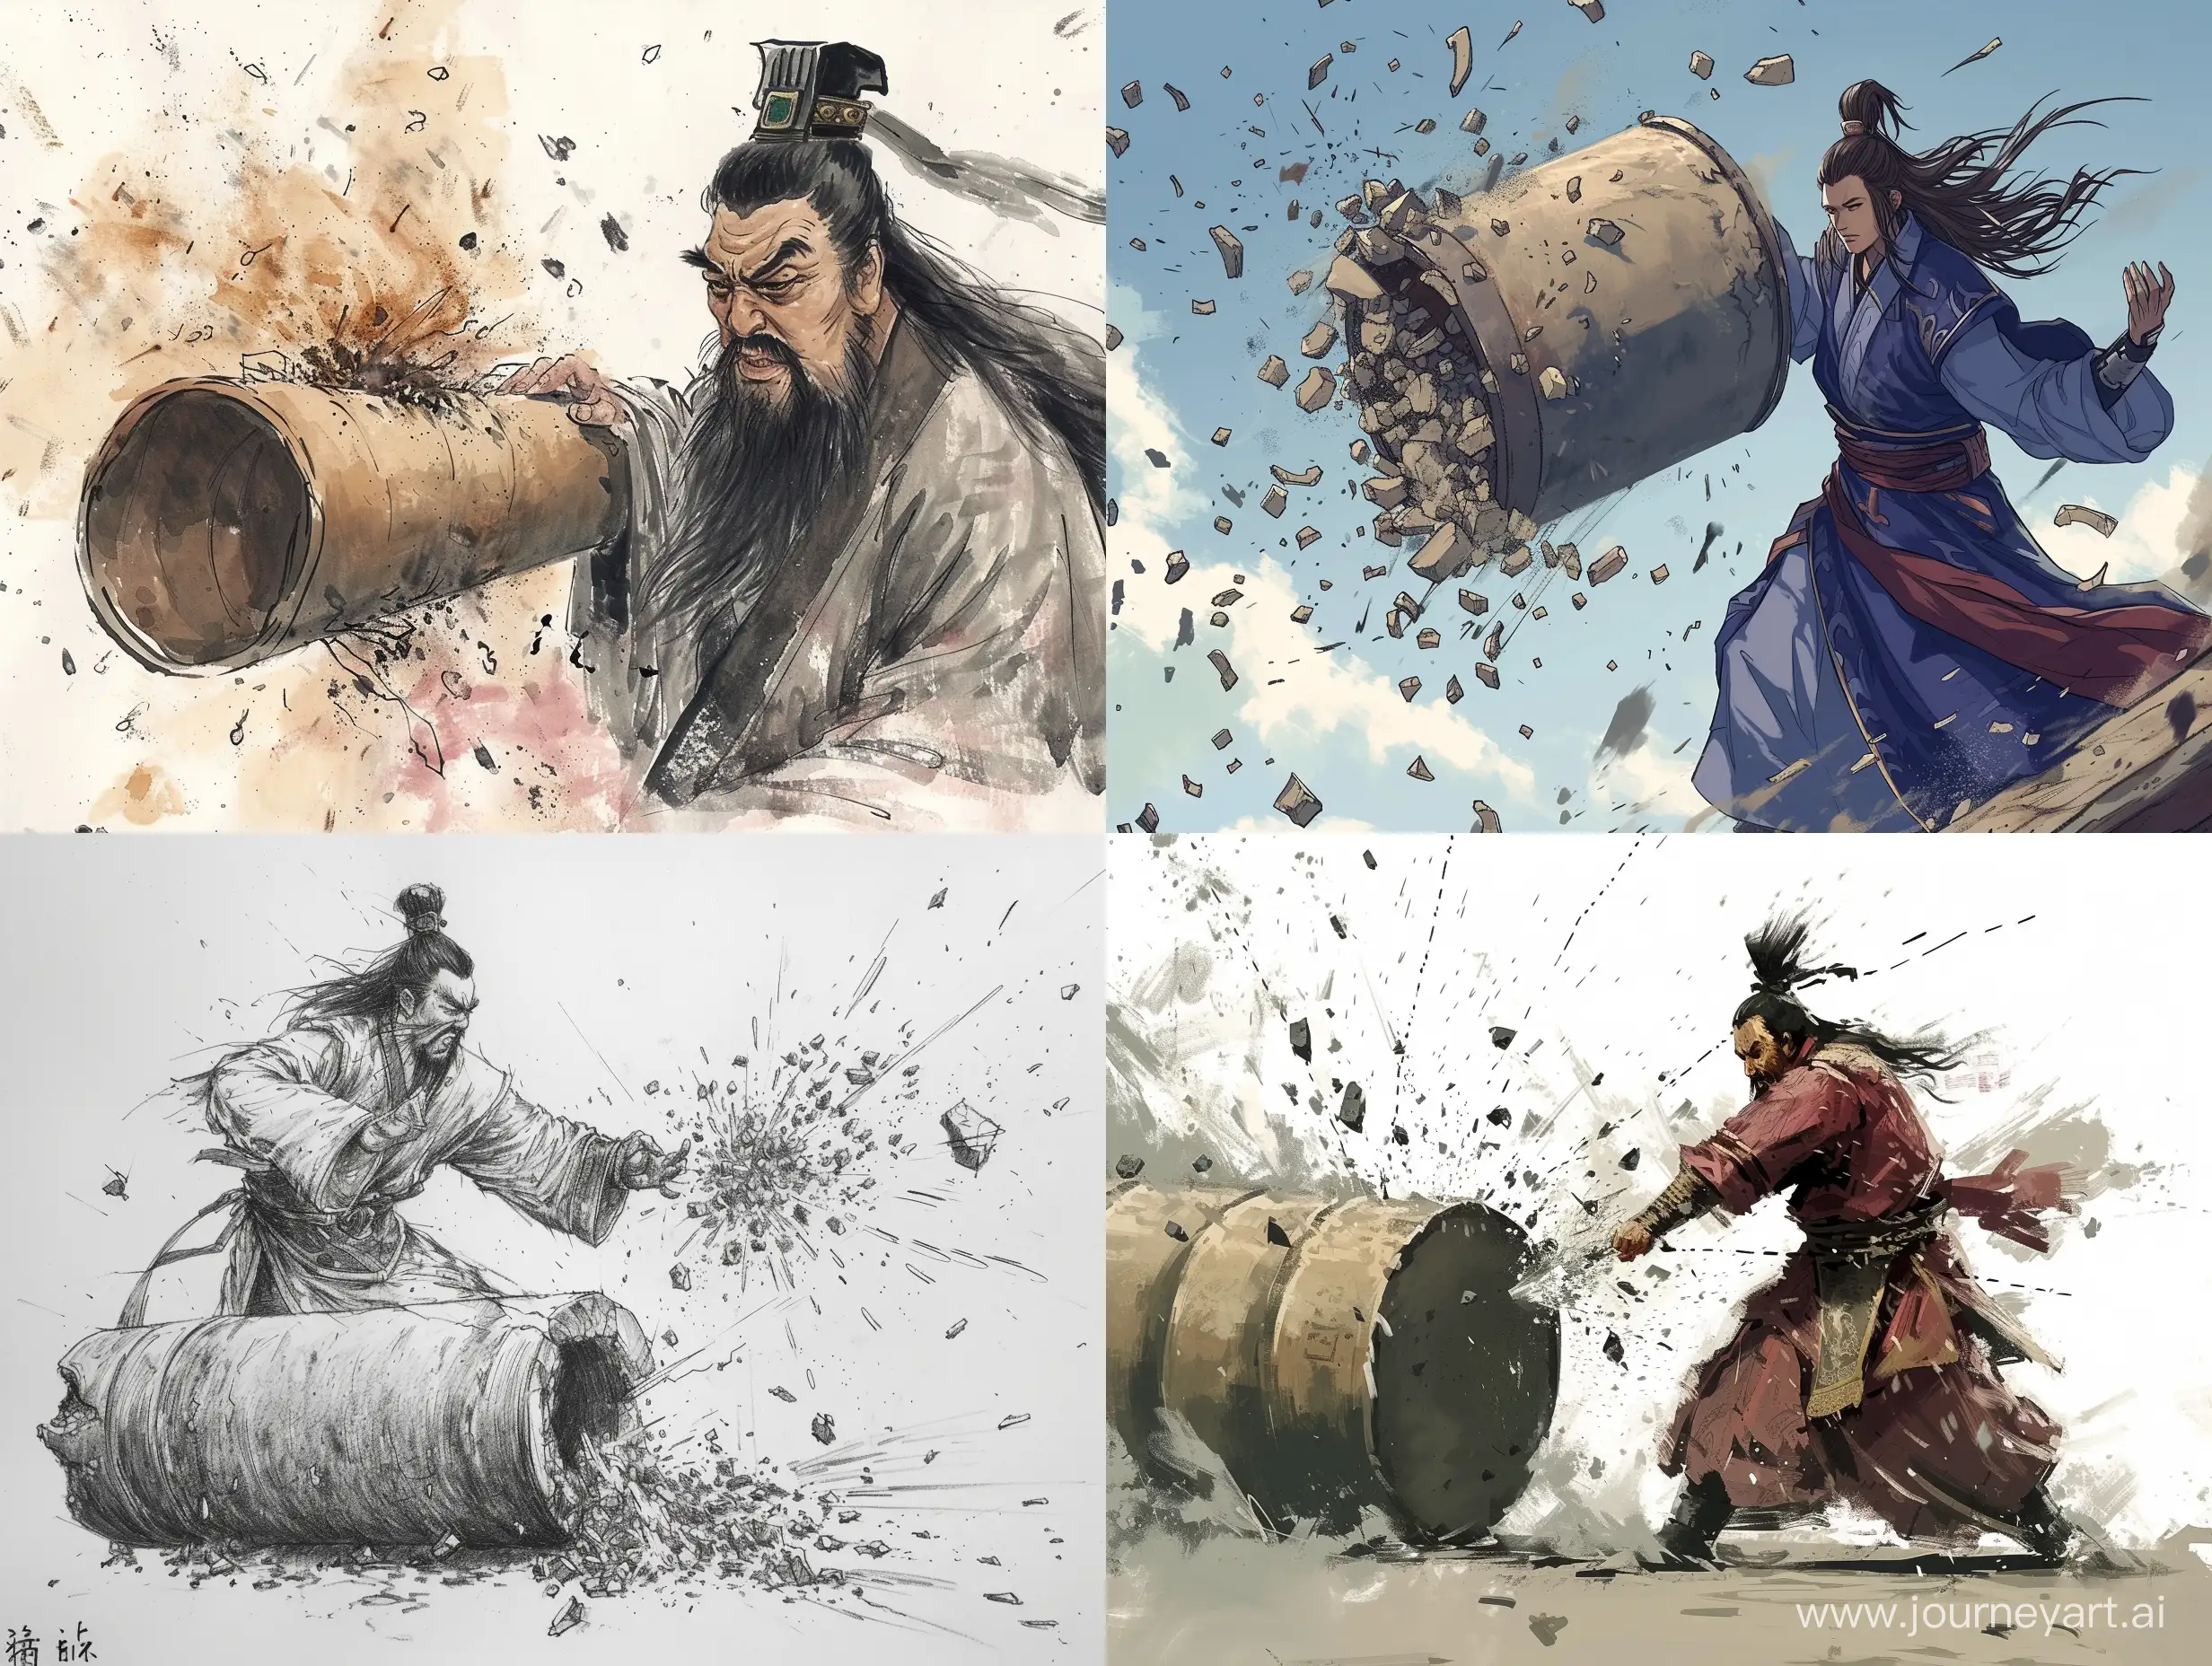 Sima-Guang-Smashes-the-Cylinder-in-a-Historic-Scene